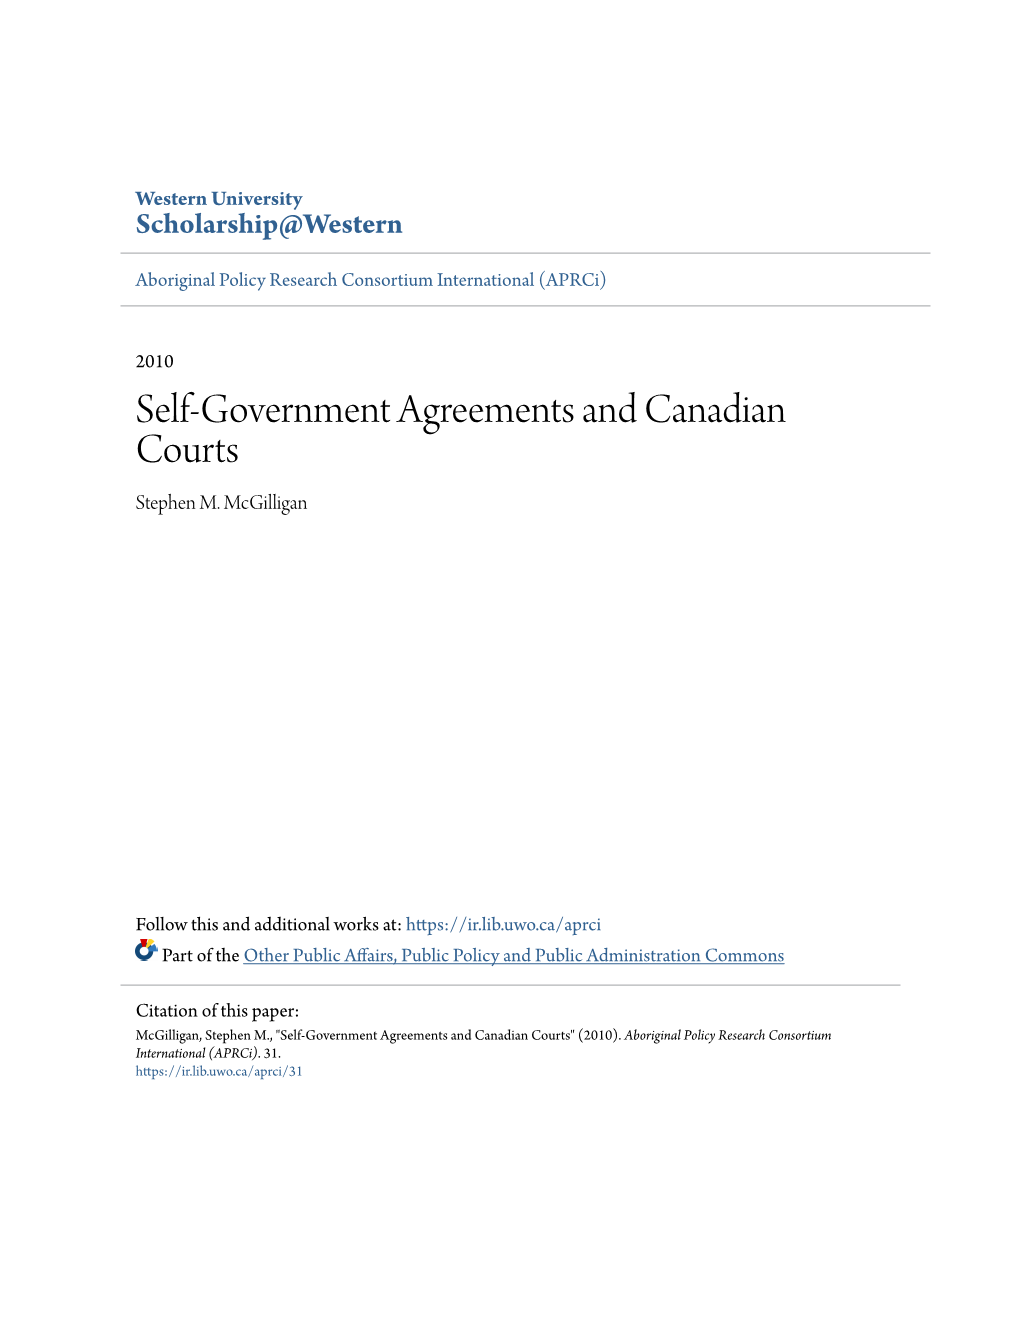 Self-Government Agreements and Canadian Courts Stephen M